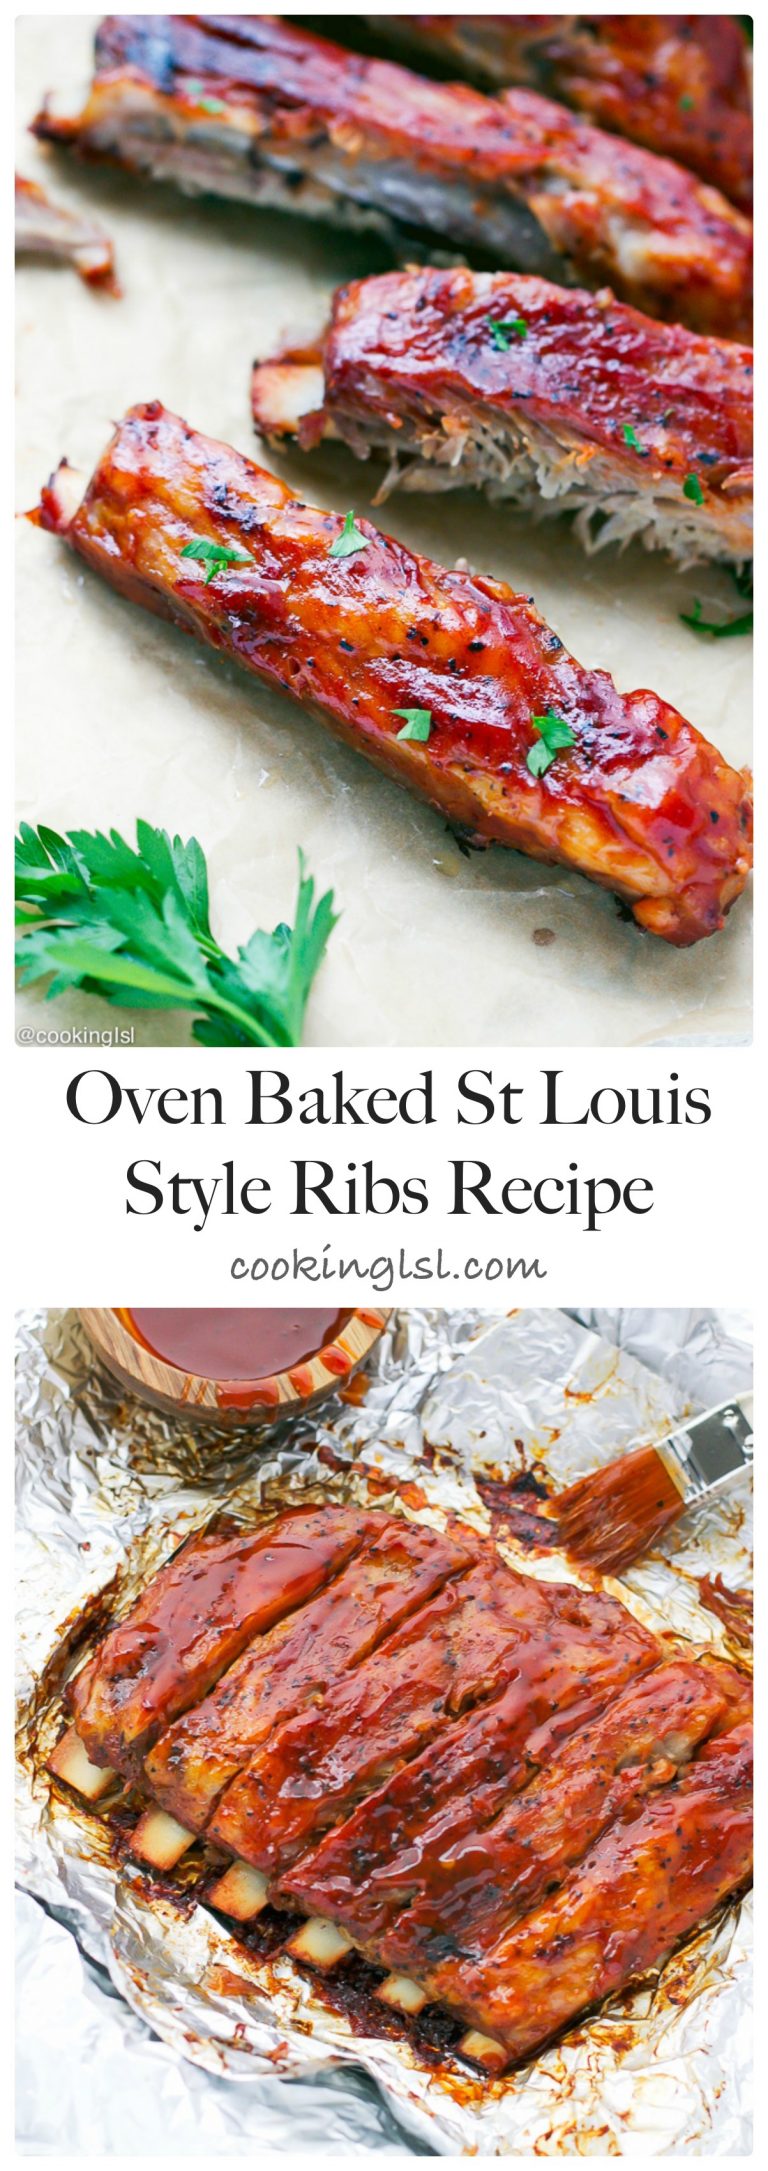 oven baked St Louis style ribs recipe